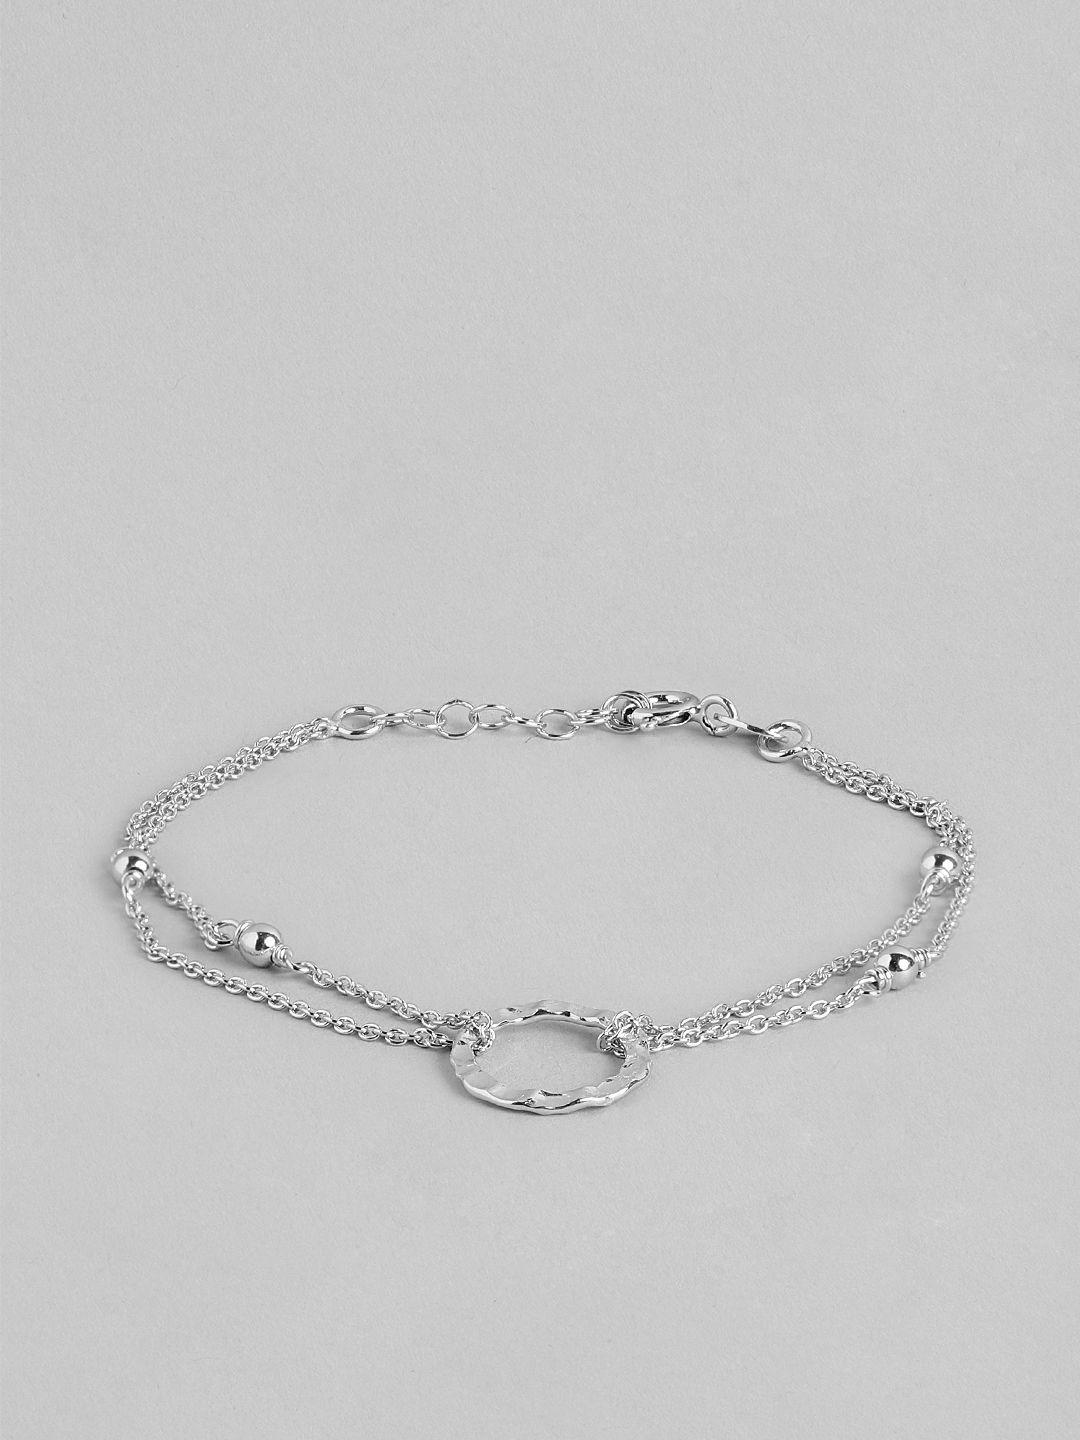 carlton-london-925-sterling-silver-chain-with-rhodium-plated-adjustable-charm-bracelet